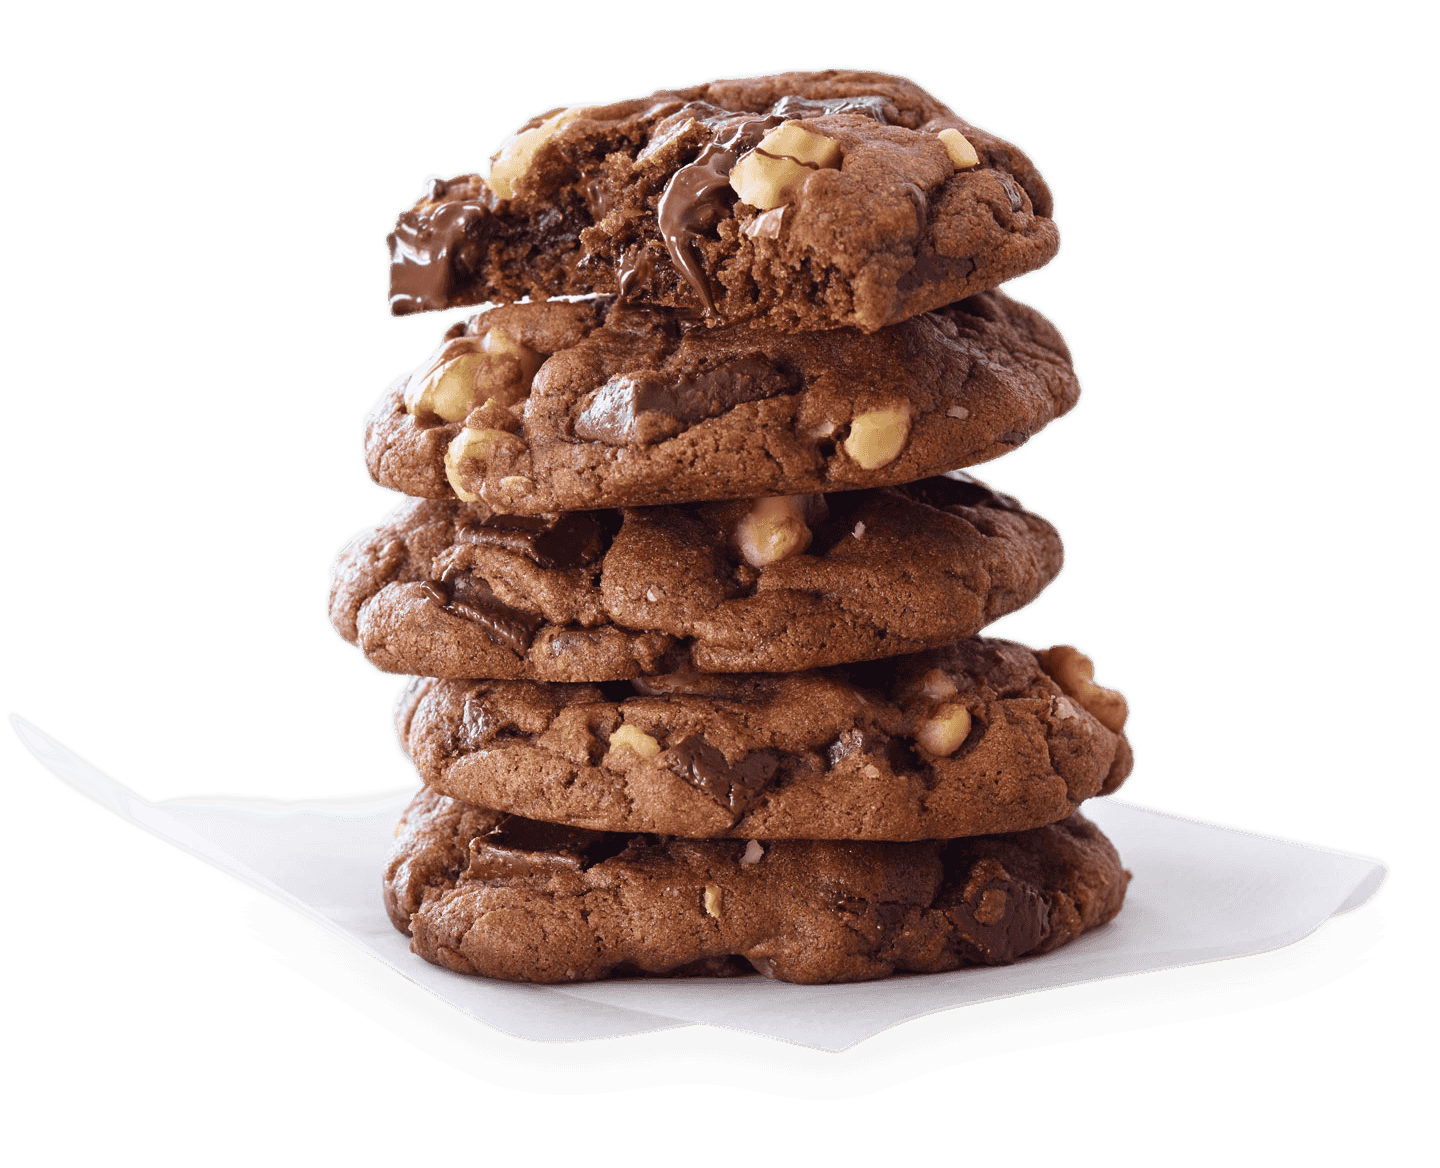 Cookies with chocolate and peanut inside.